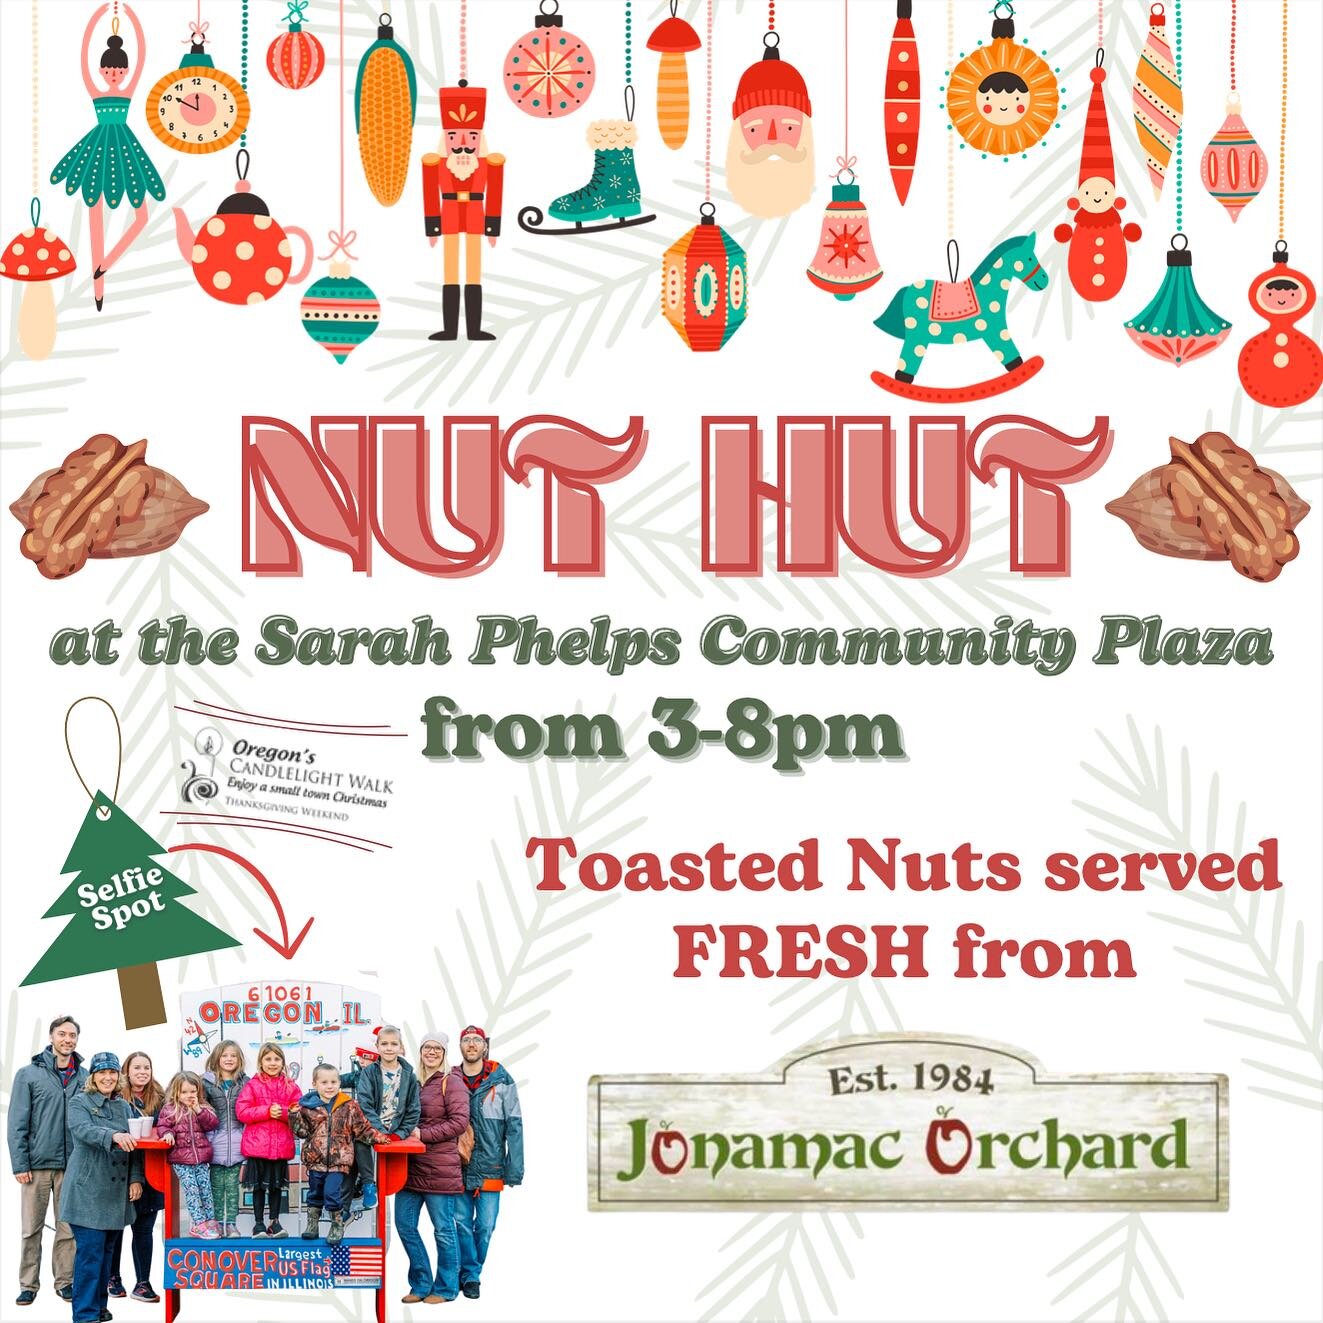 Be sure to stop by the Sarah Phelps Community Plaza and get your toasted nuts from @jonamacorchard and take your Holiday Card photos in the giant beach chair! 

#candlelightwalk #smalltownchristmas #christmas #illinois #christmasmagic #christmascount